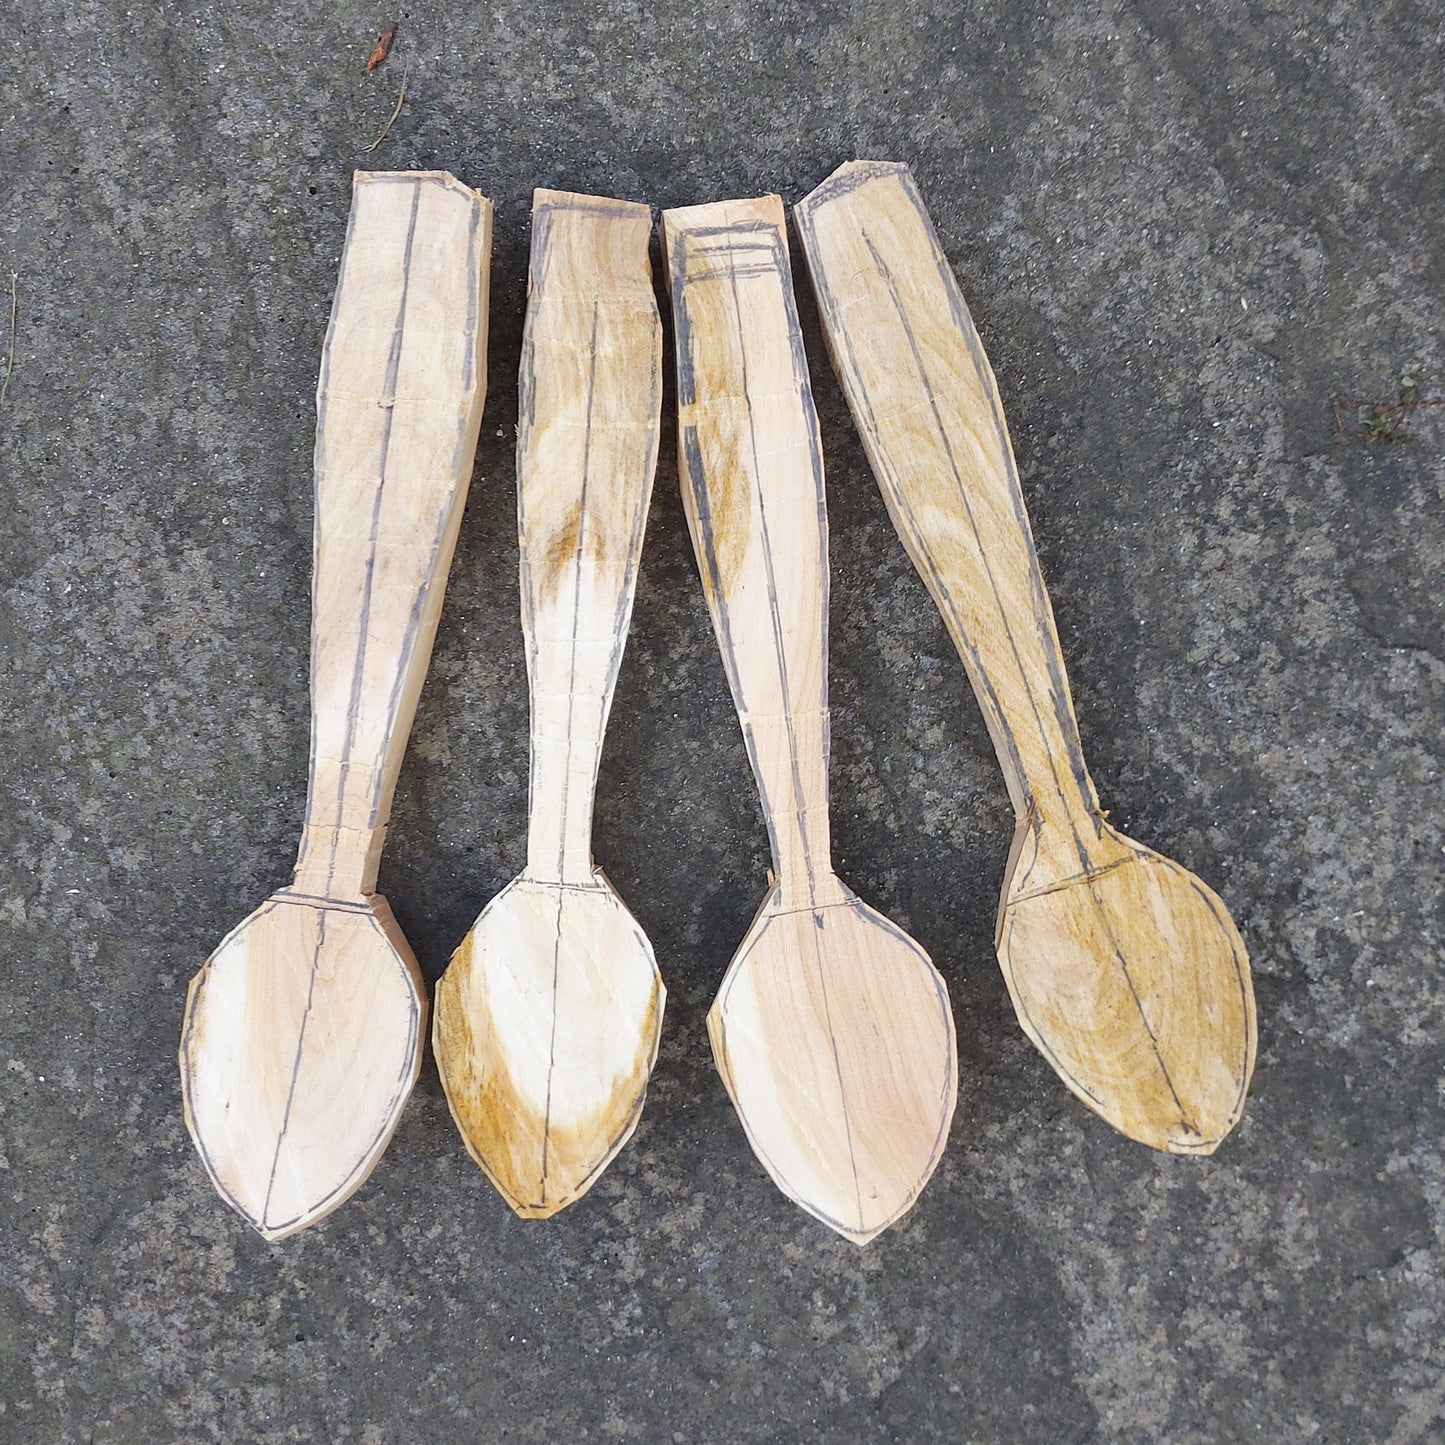 1x Eating Spoon Blank - Carve your Own!